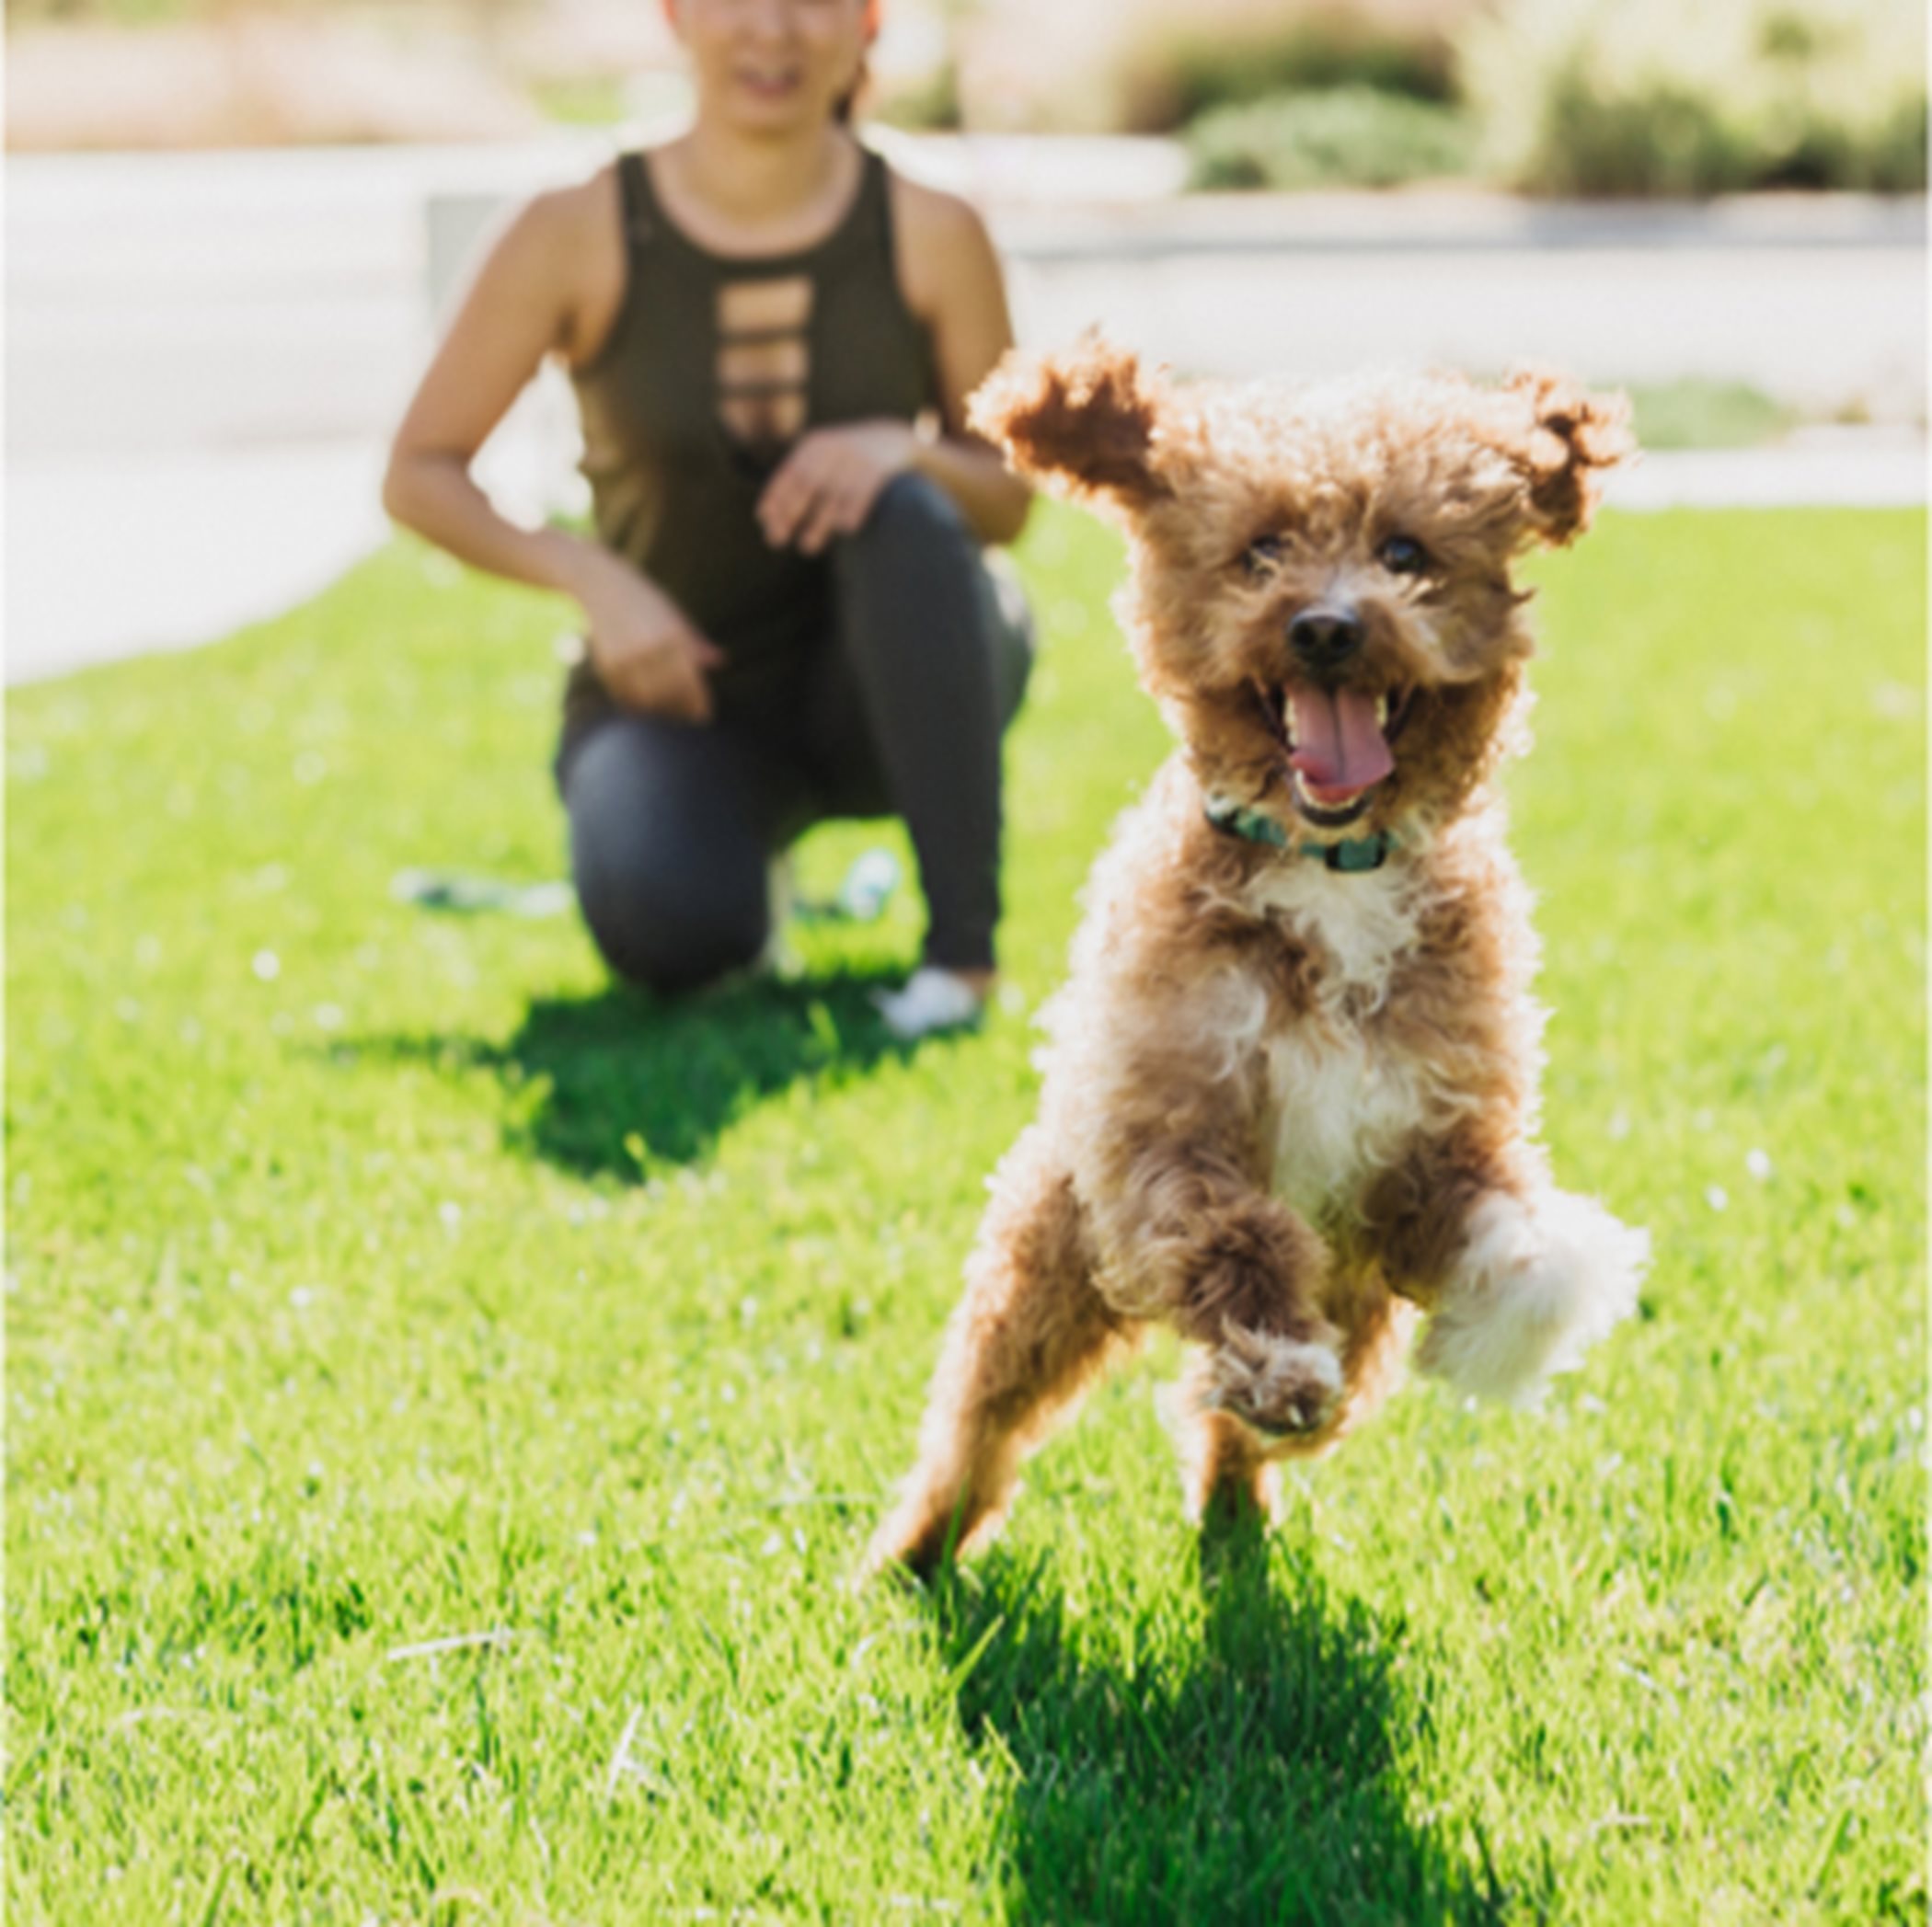 A dog running away from a person